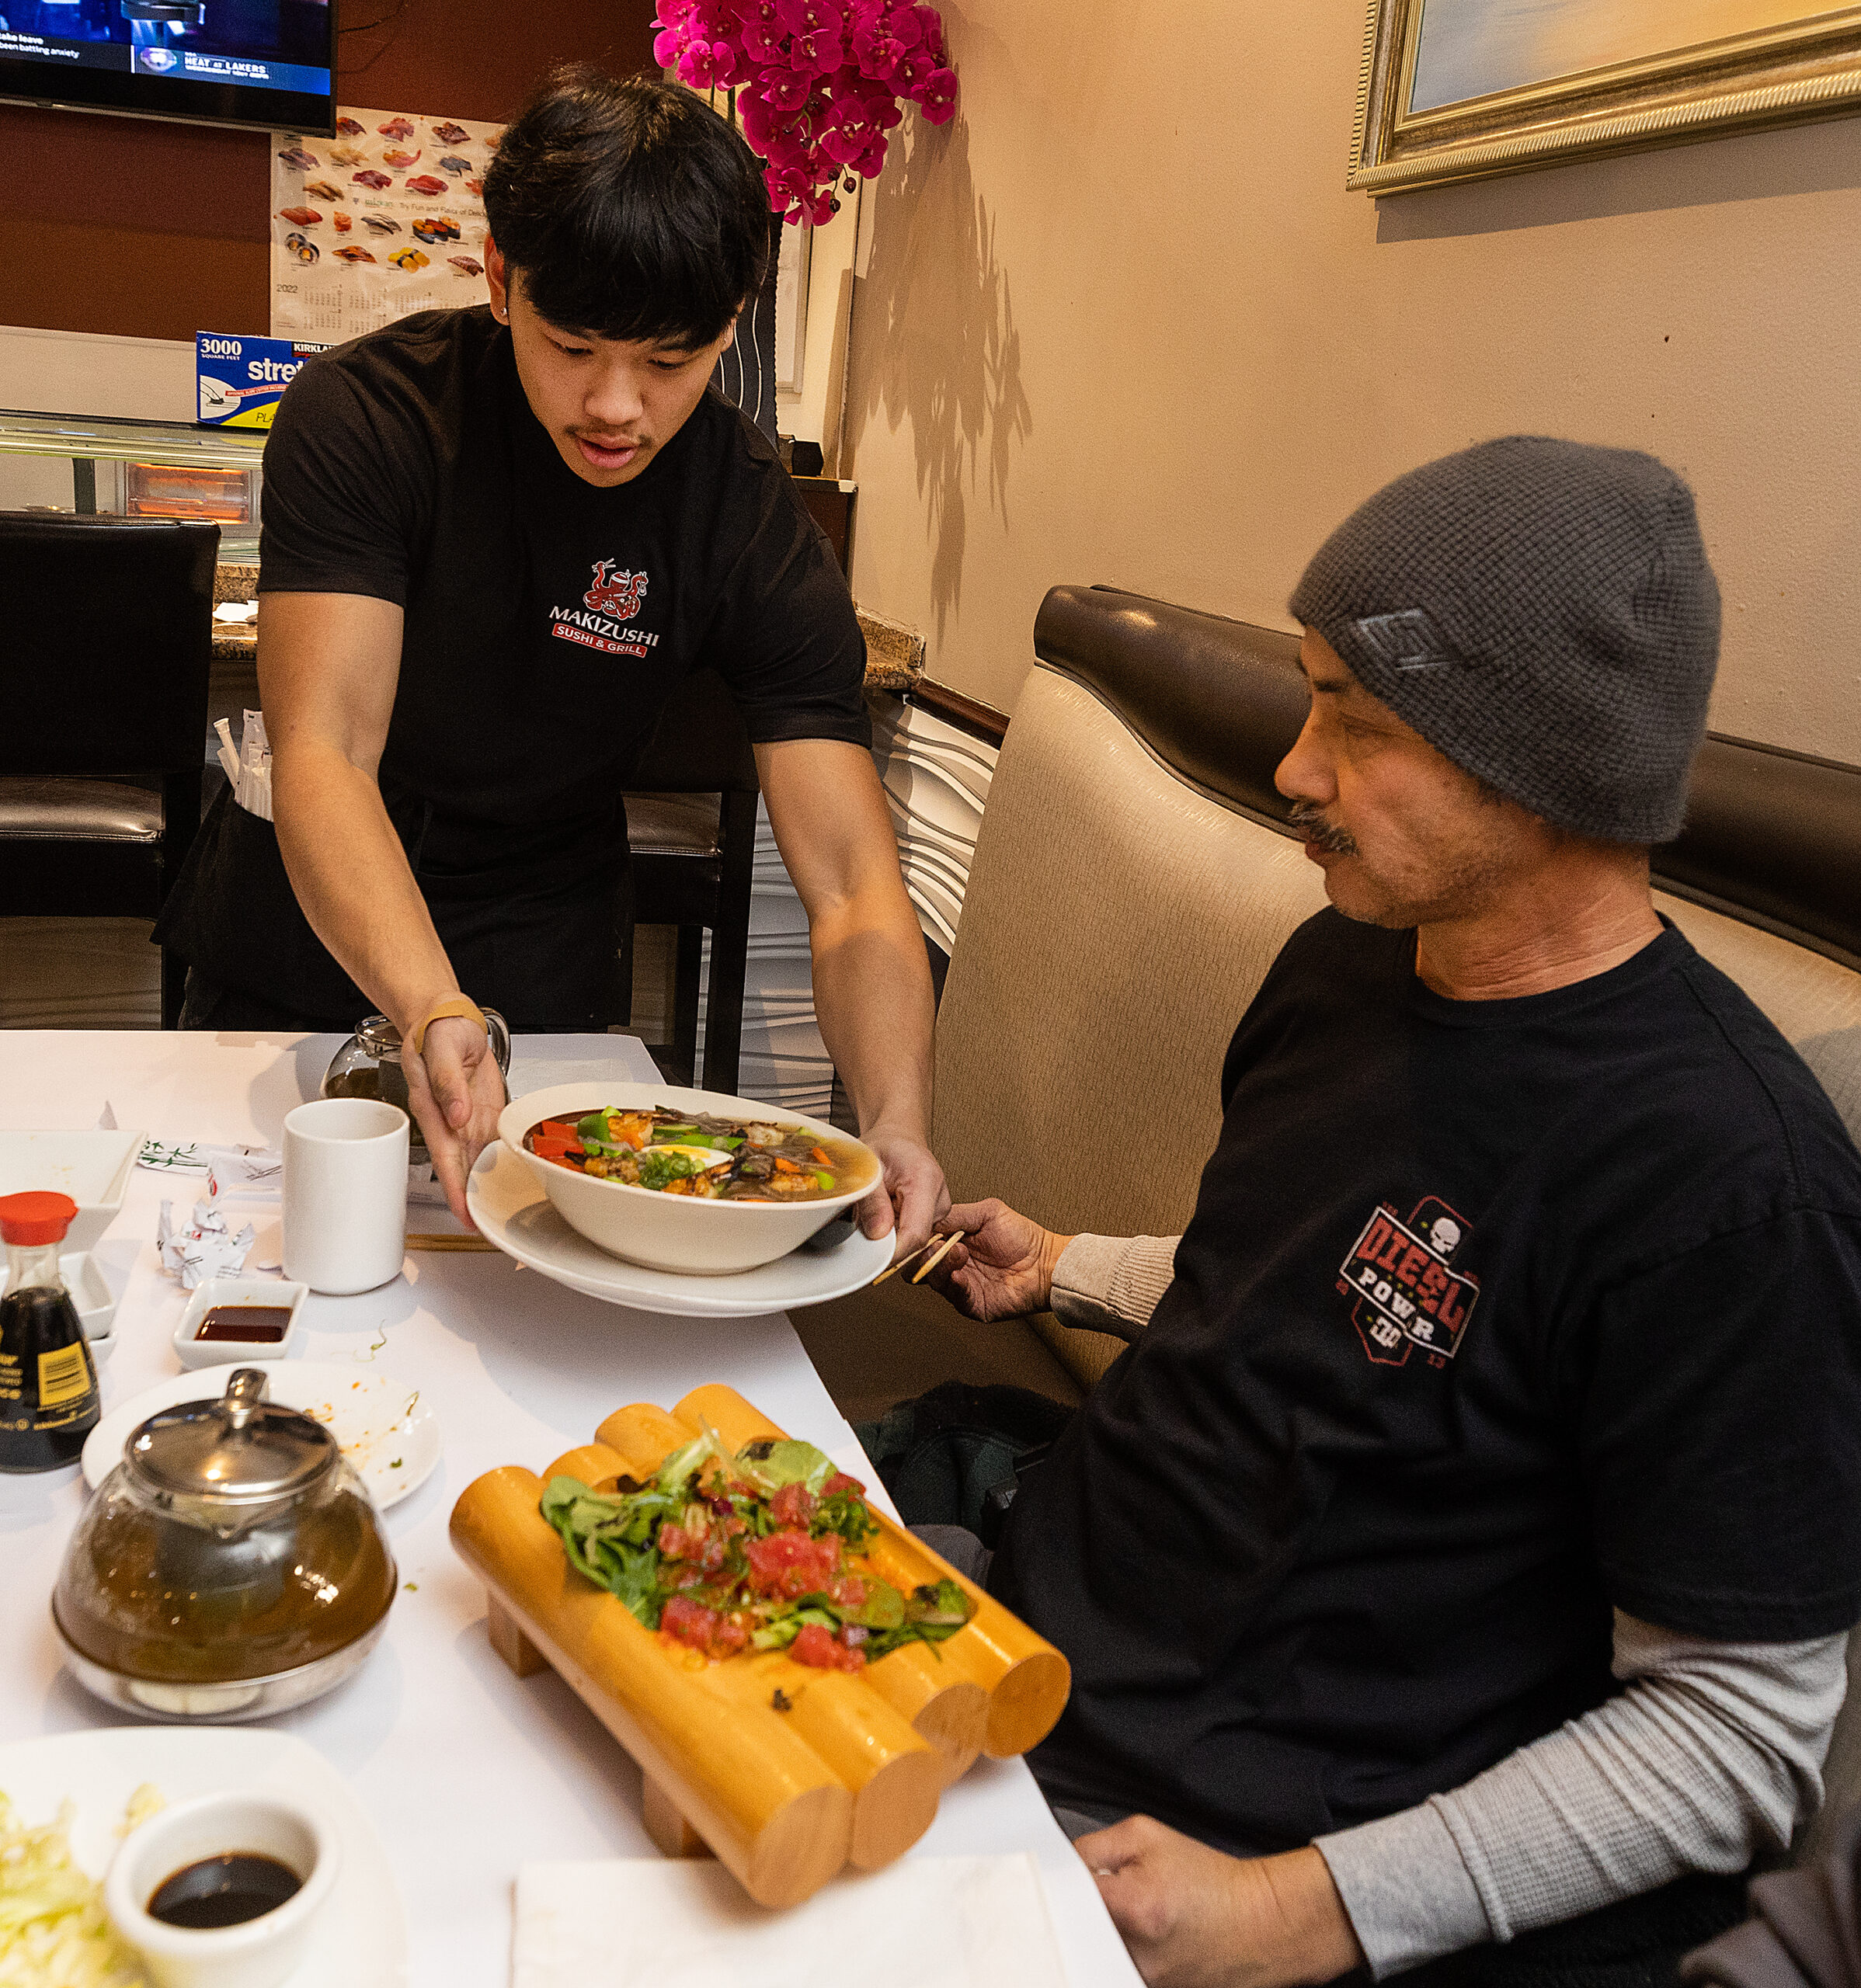 Robert Phouthavong, 18, owner of Makizushi delivers an order to Tom Hong at the Santa Rosa restaurant Tuesday, January 3, 2023. Robert and his father Southavichit opened the restaurant after learning the business at Hana Sushi in Sebastopol. (John Burgess/The Press Democrat)